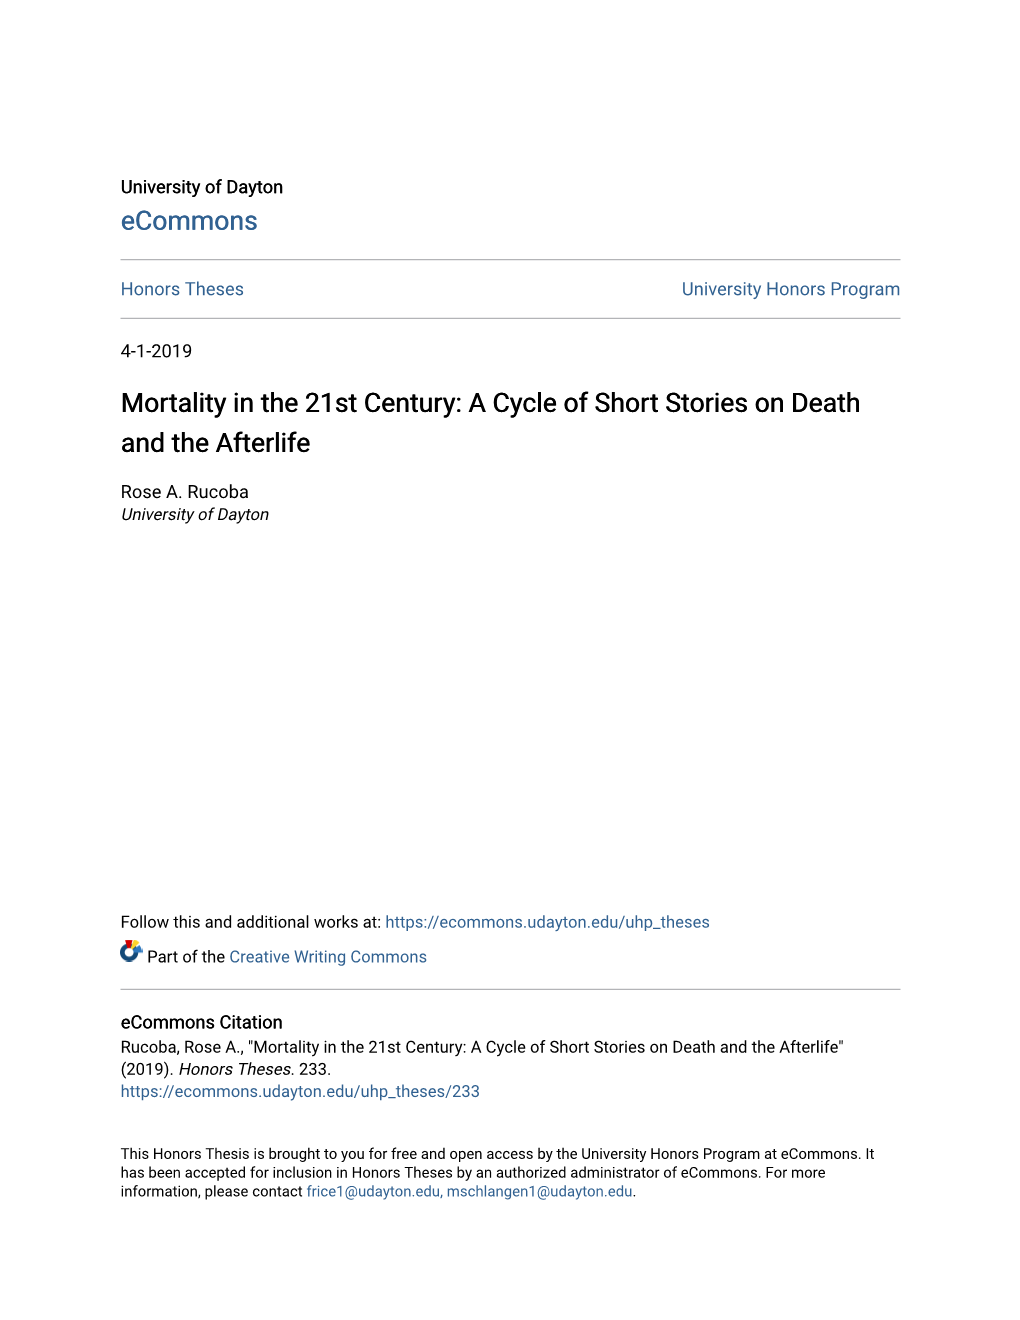 Mortality in the 21St Century: a Cycle of Short Stories on Death and the Afterlife